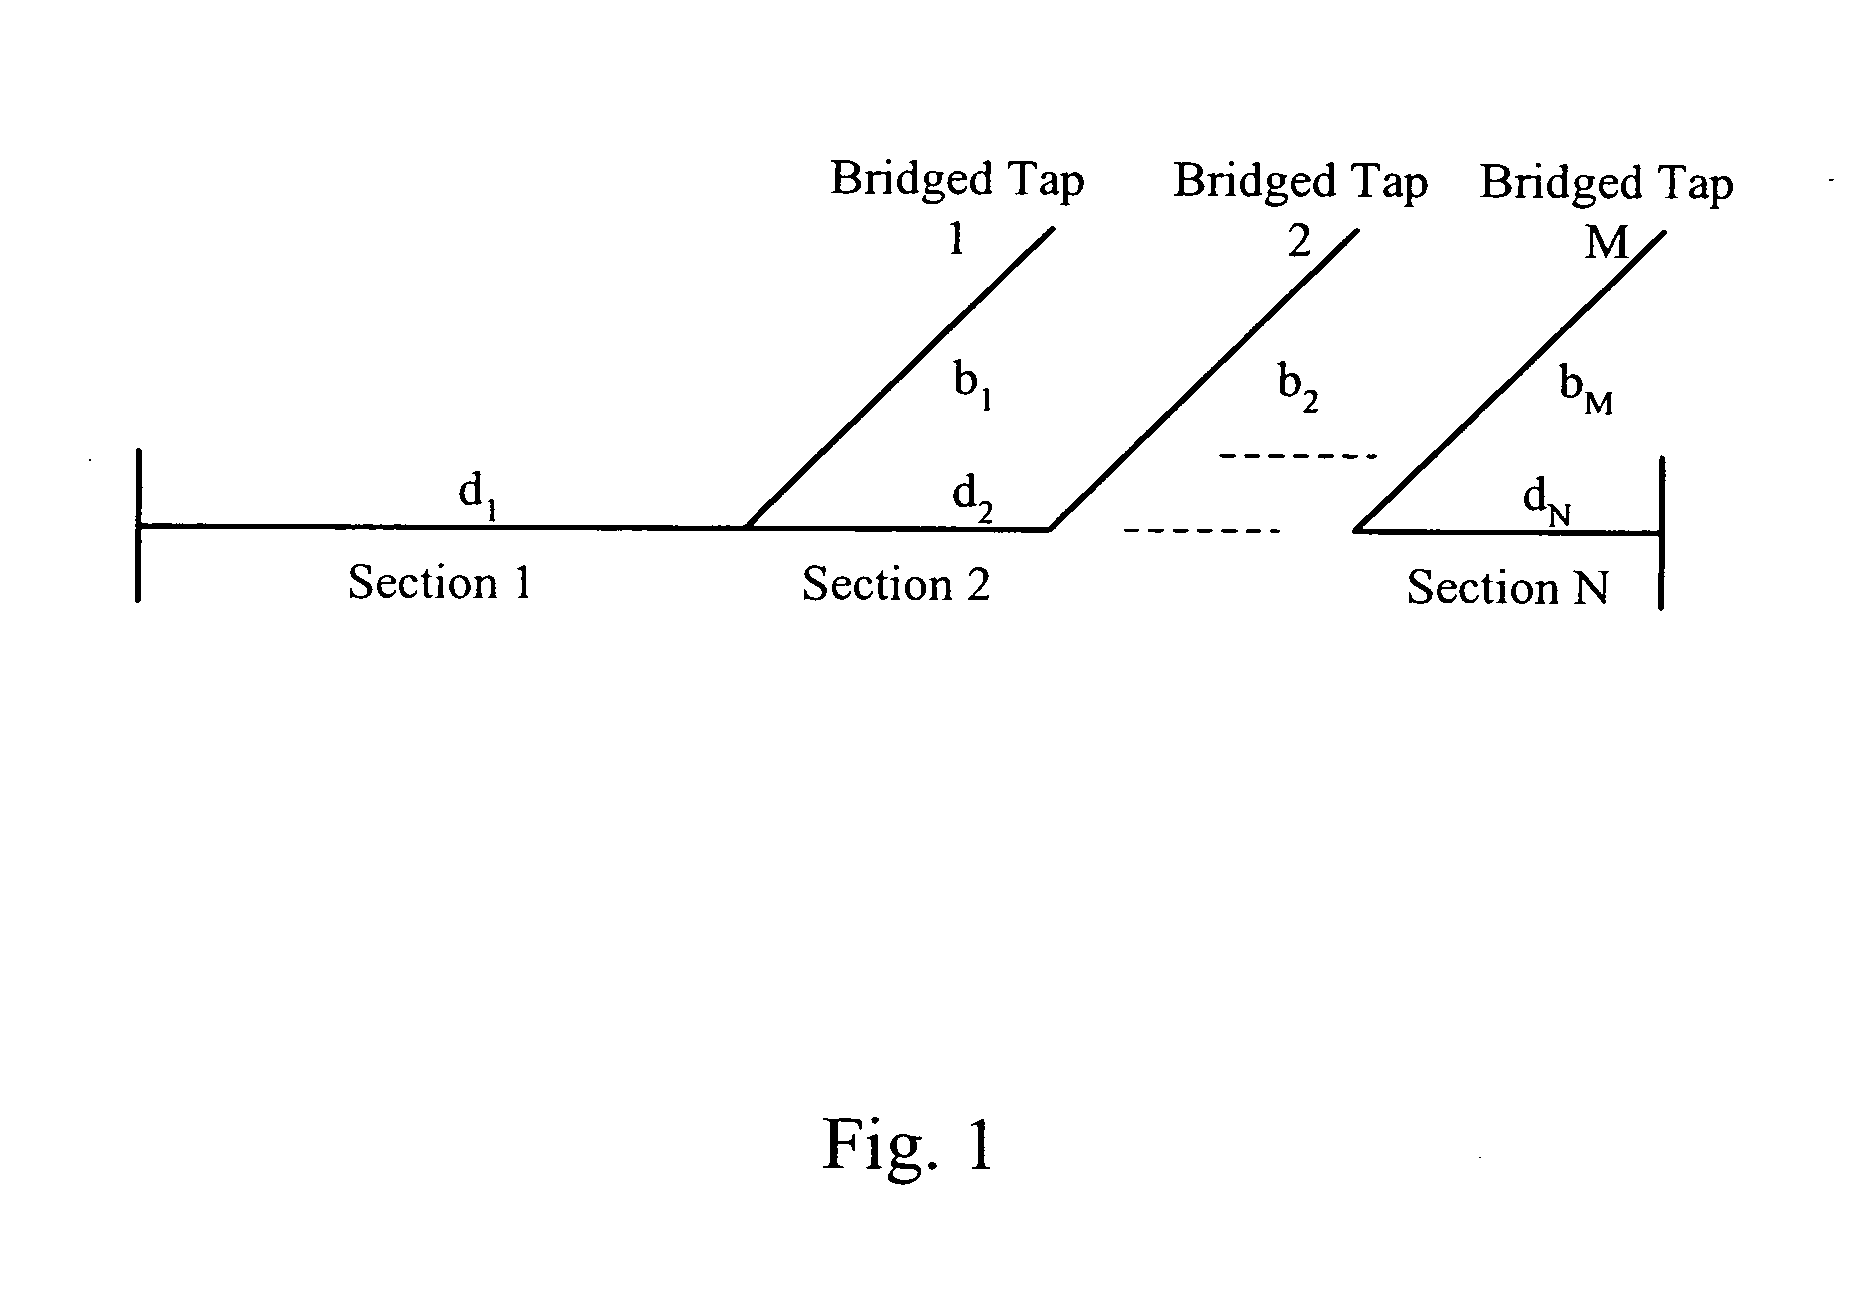 Systems and methods for loop length and bridged tap length determination of a transmission line